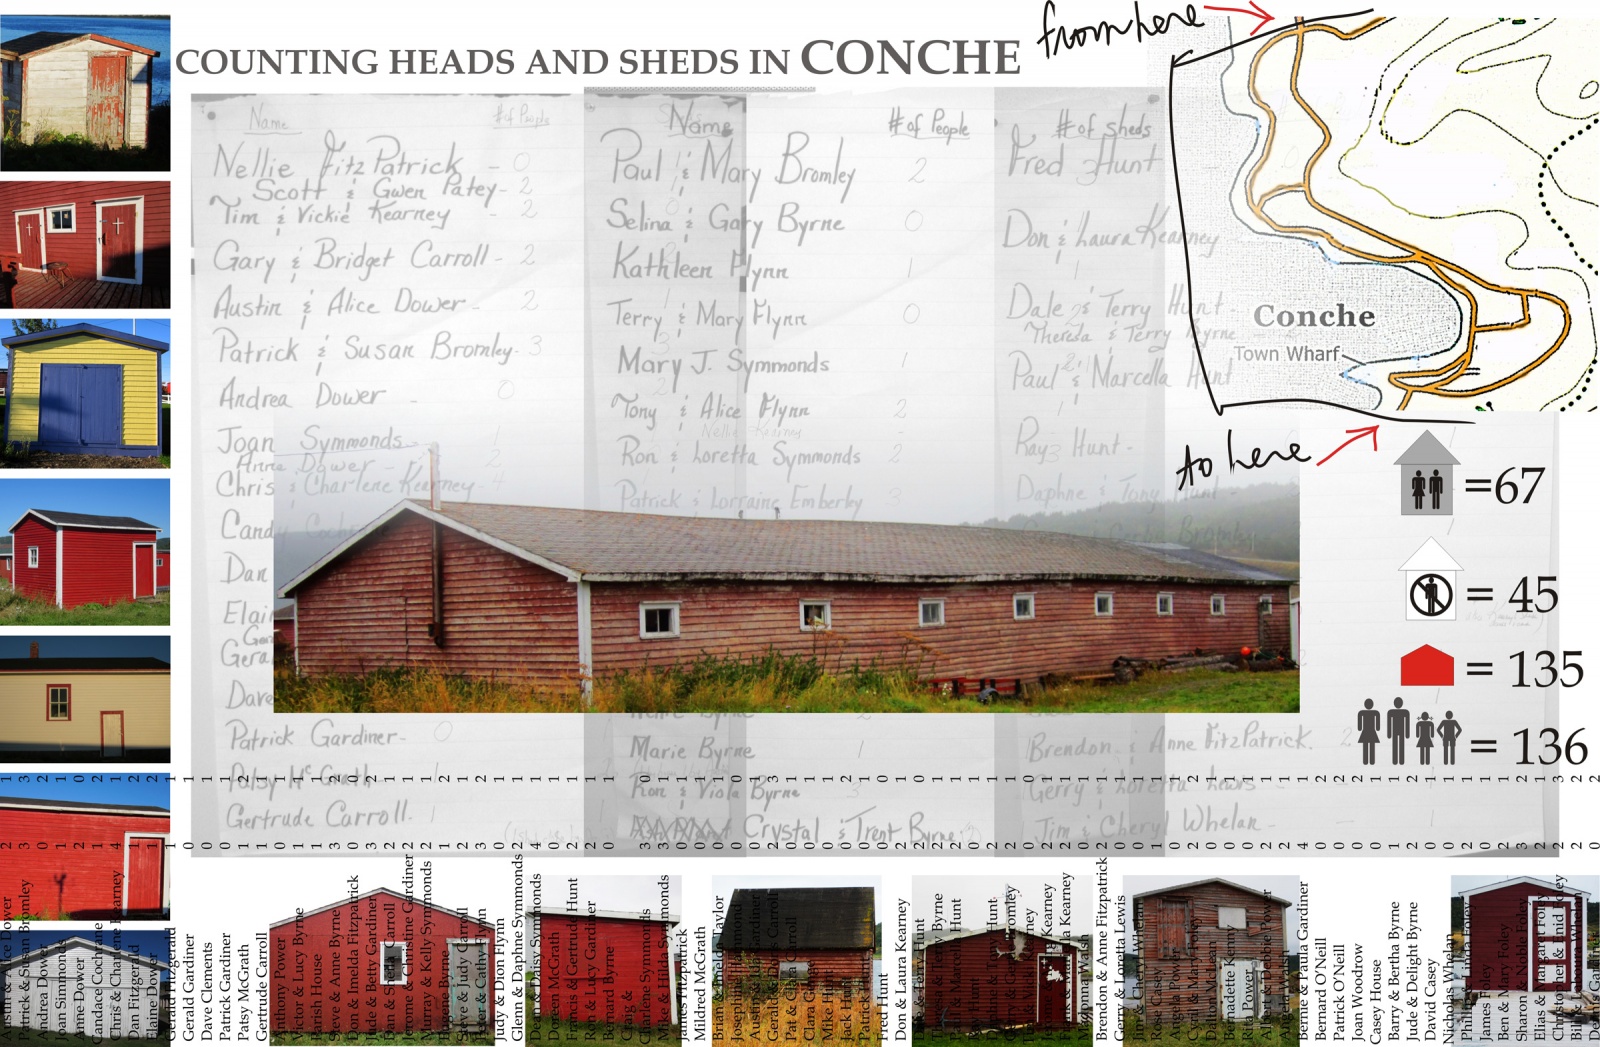 Counting Heads and Sheds in Conche